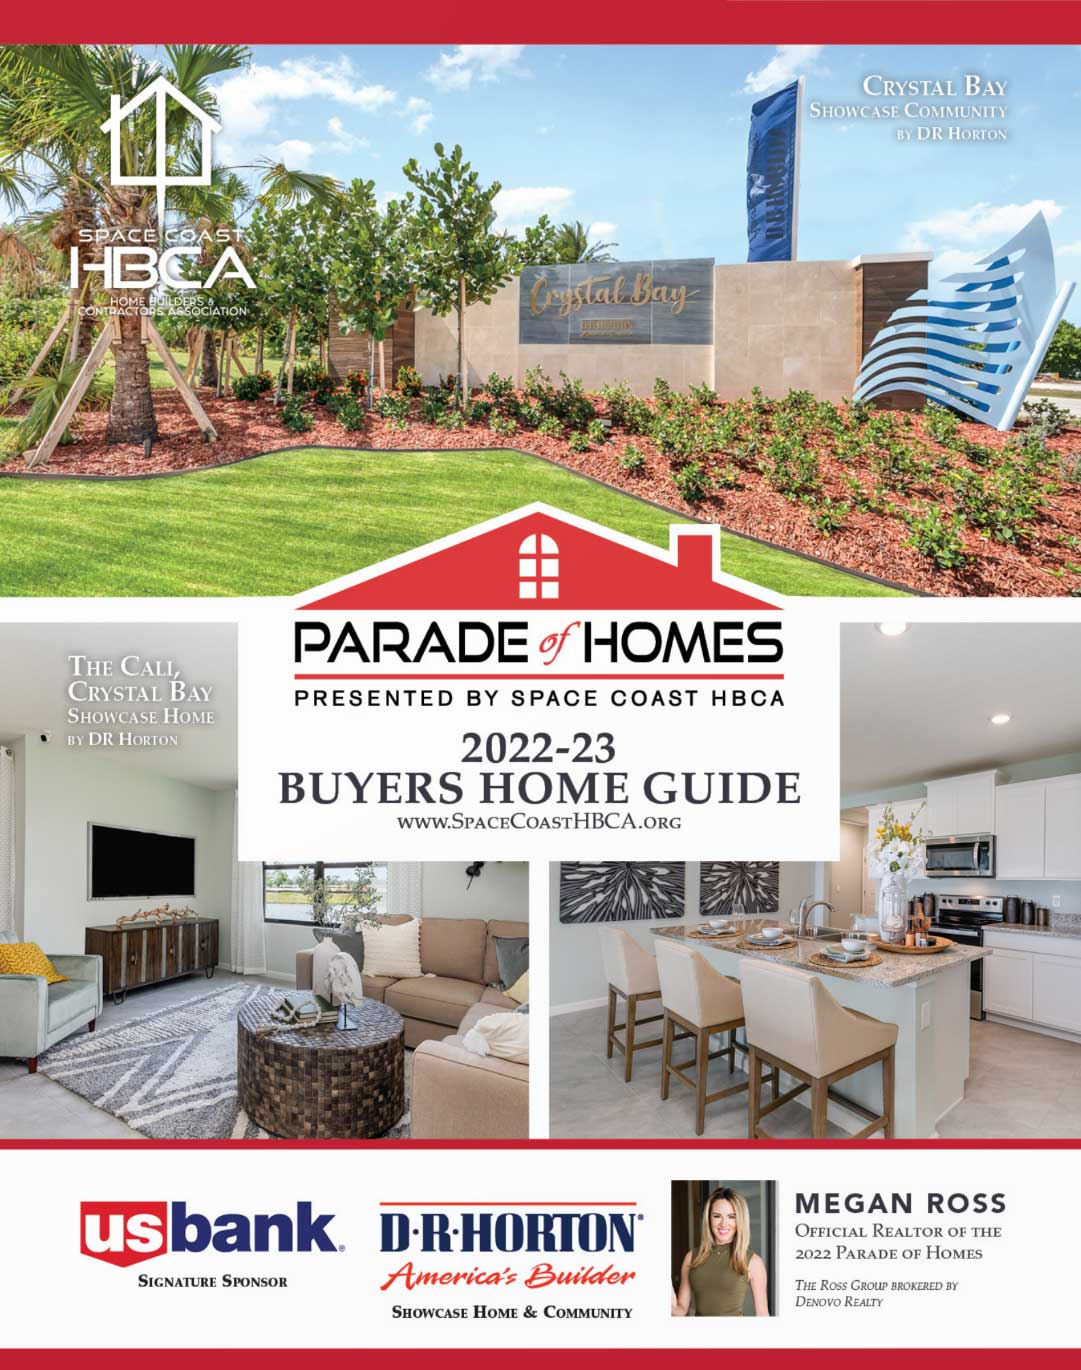 See the 20222023 Space Coast HBCA Parade of Homes Buyers Home Guide